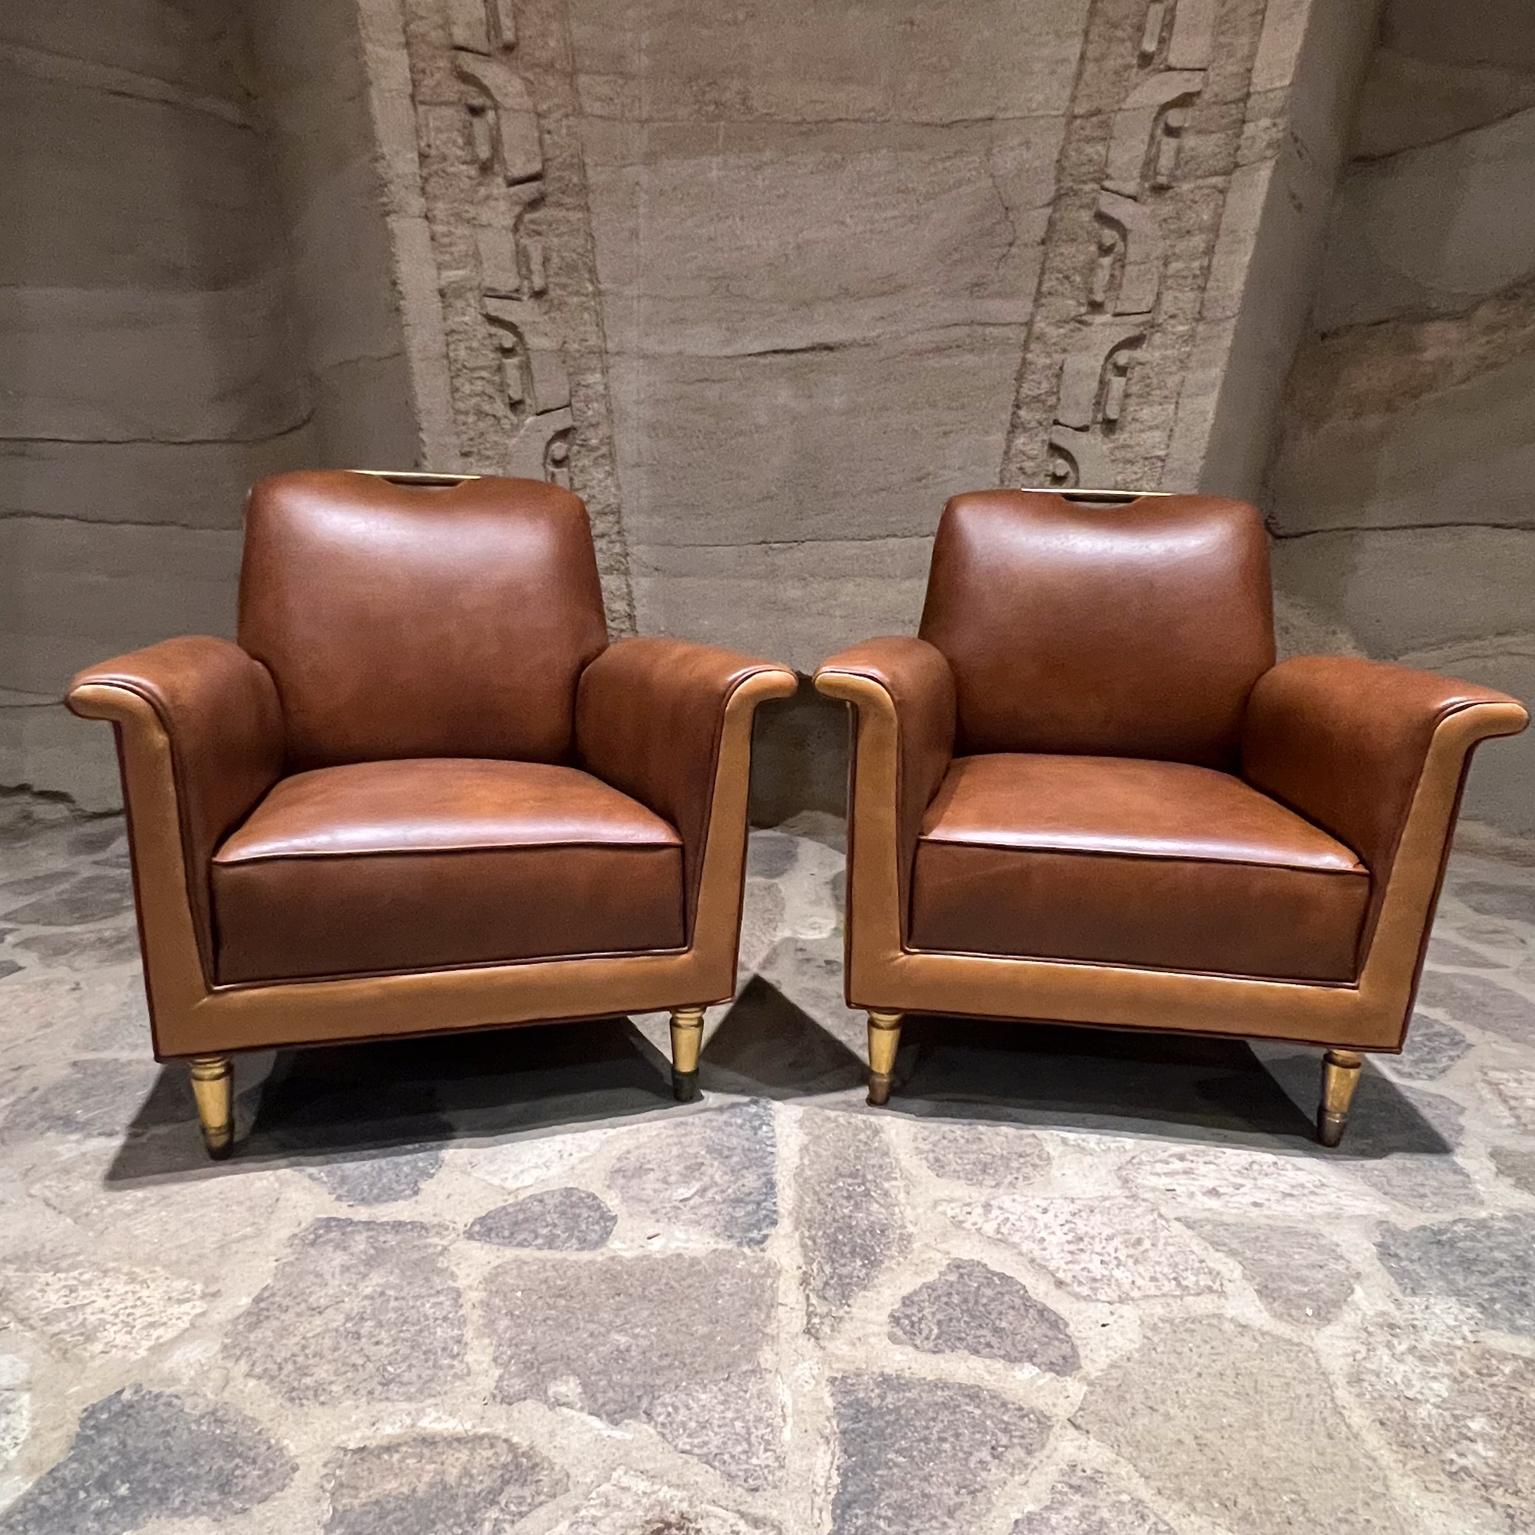 Mexican 1950s Octavio Vidales Chairs Leather and Mahogany Mexico City For Sale